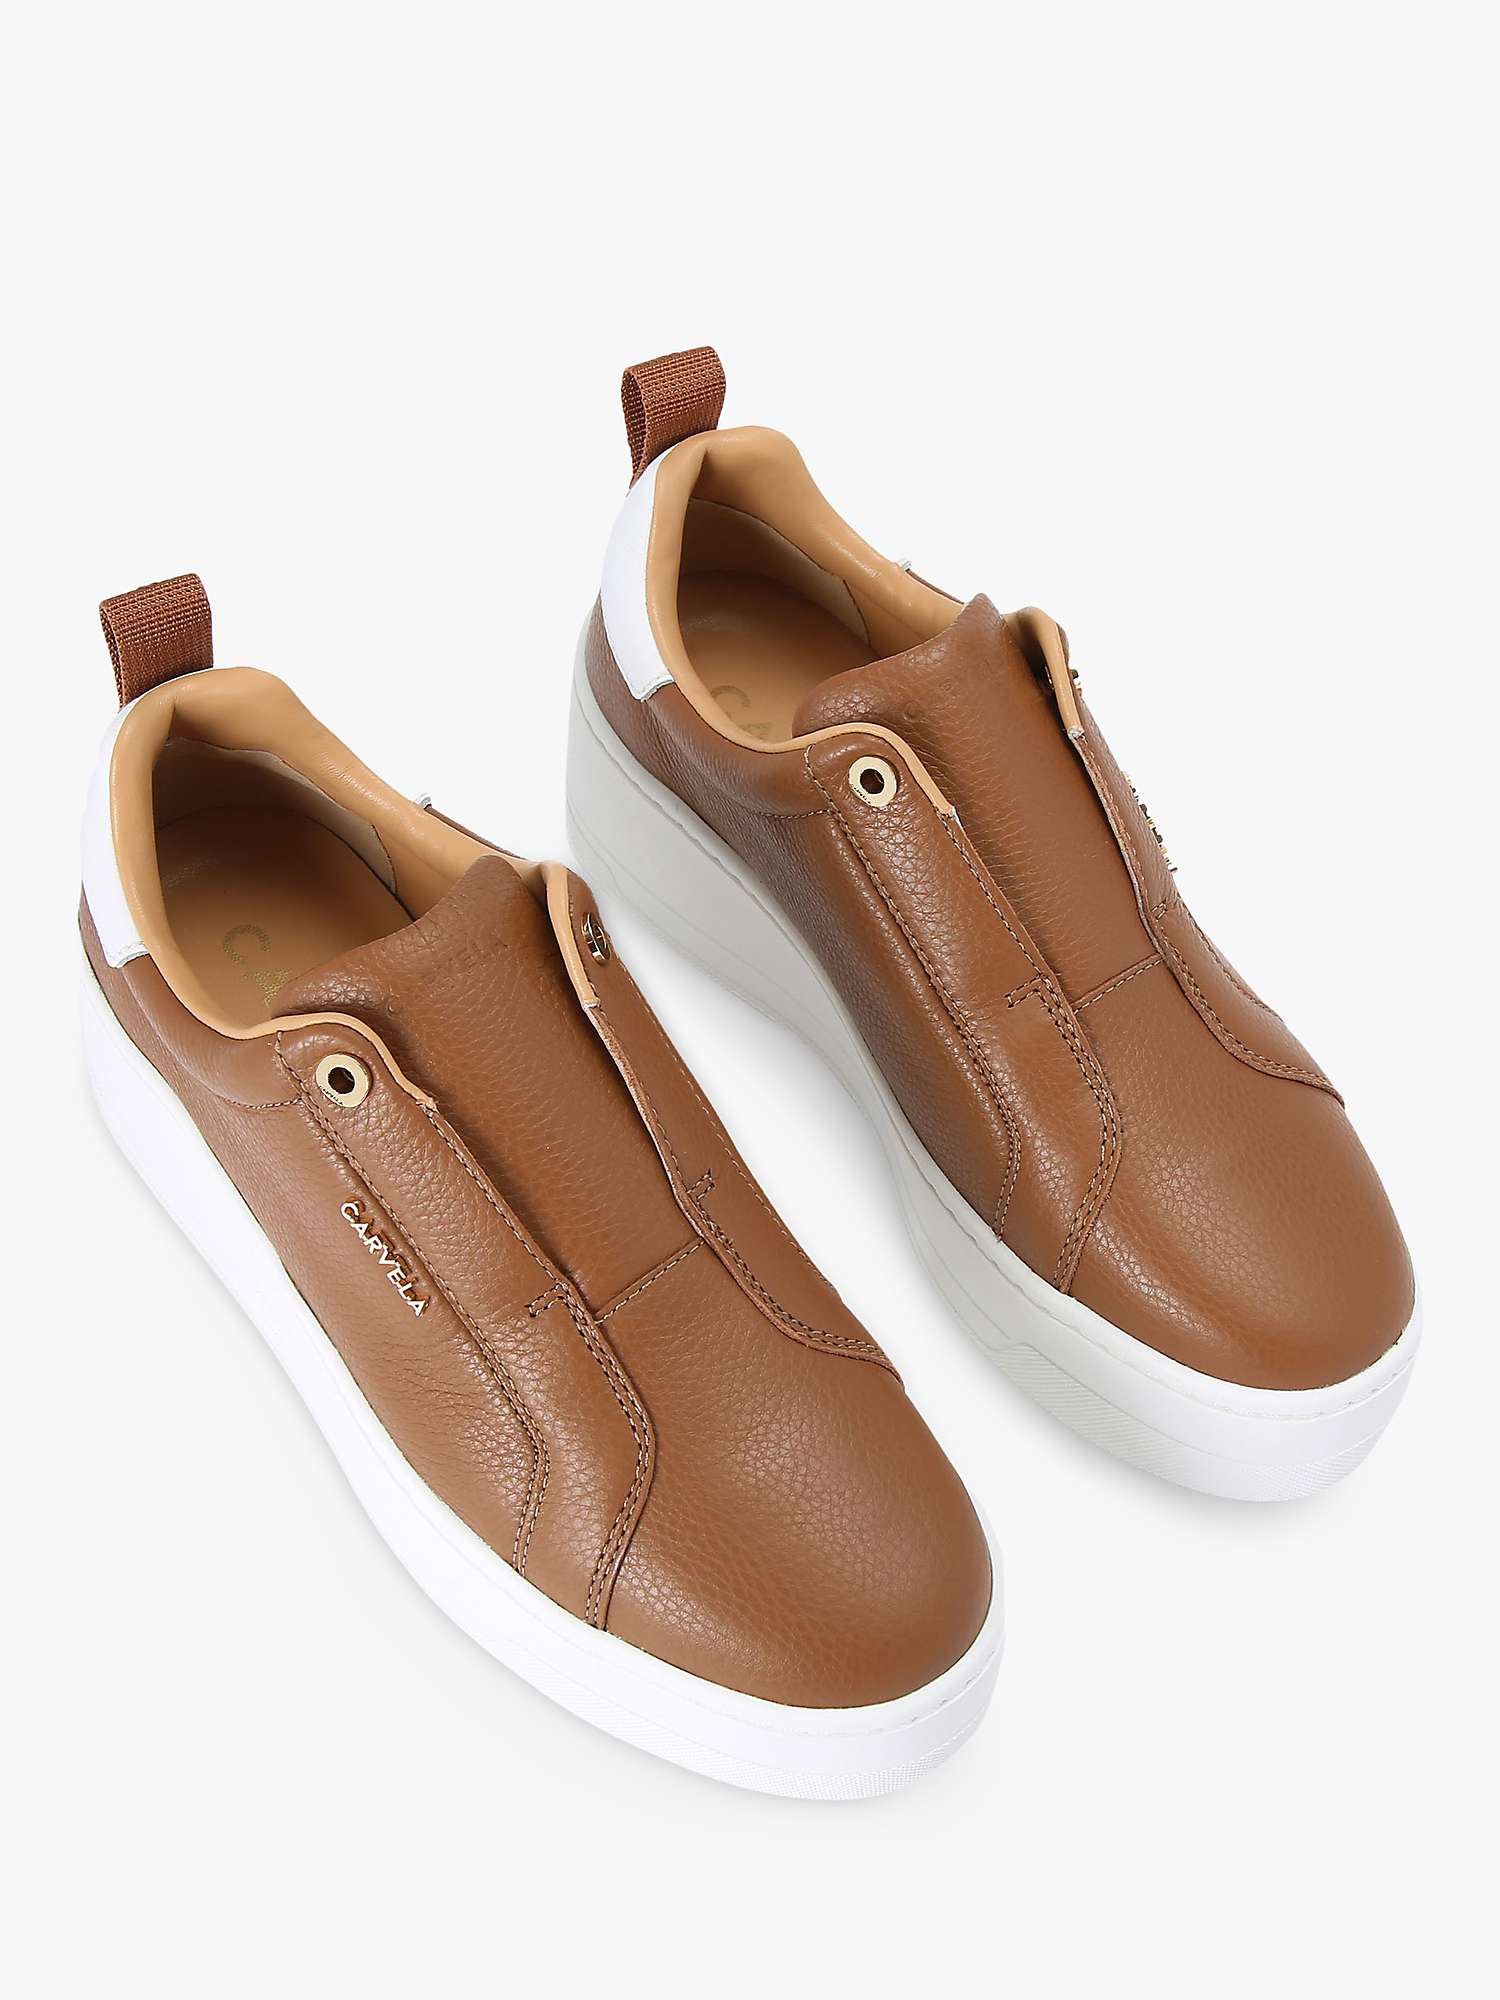 Buy Carvela Connected Leather Trainers Online at johnlewis.com